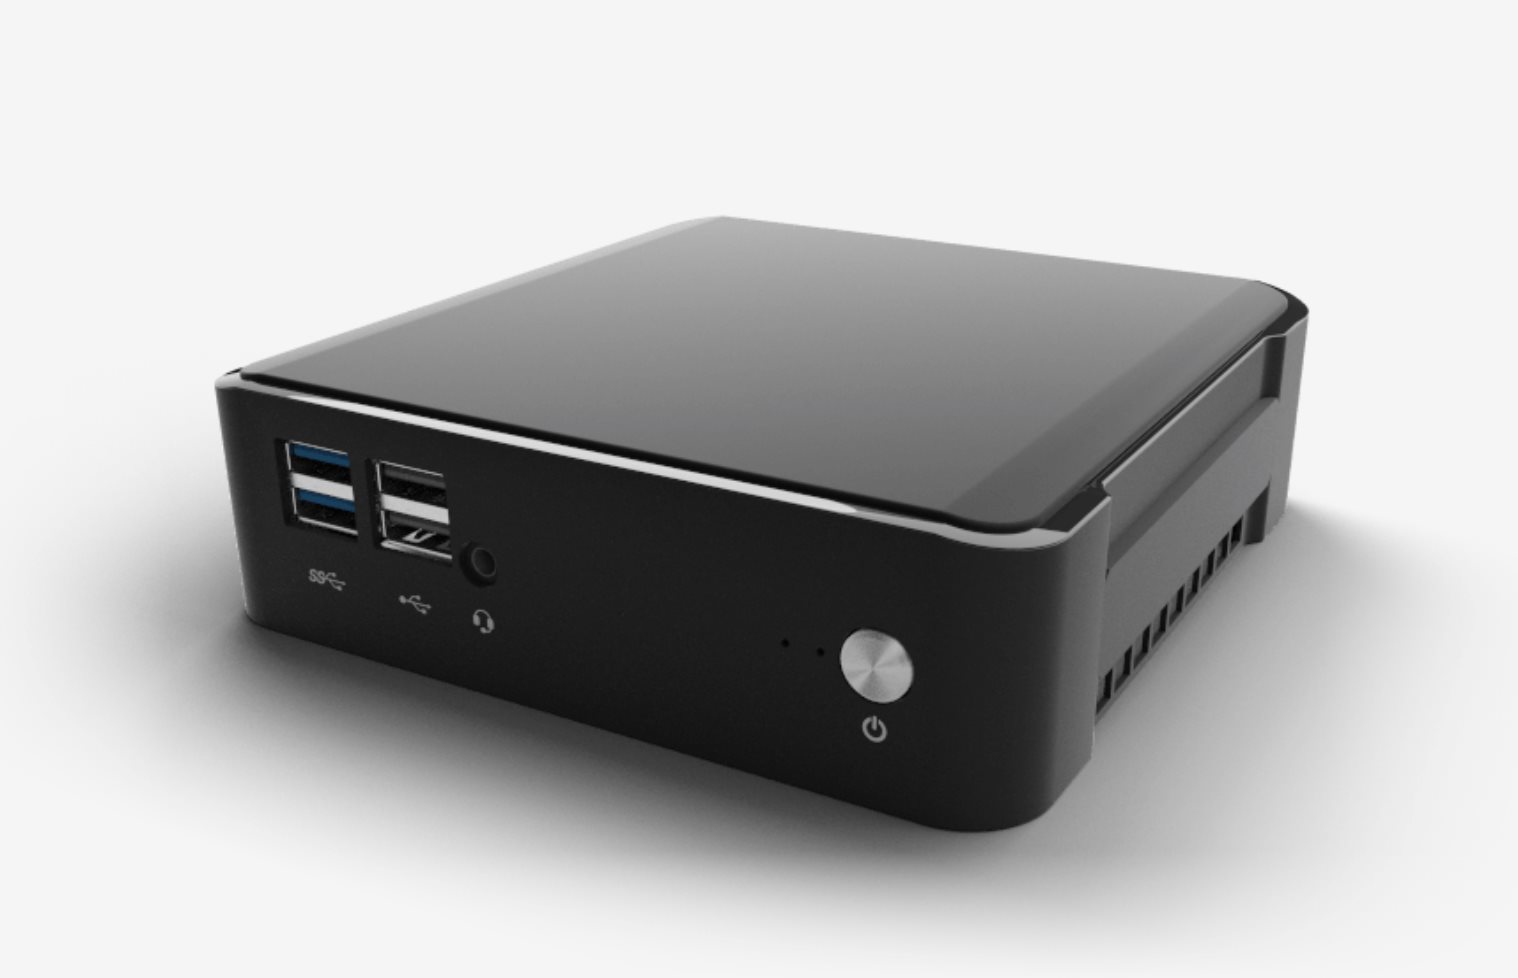 Librem Mini Linux Computer Now Available with Active Cooling Ubuntu Free